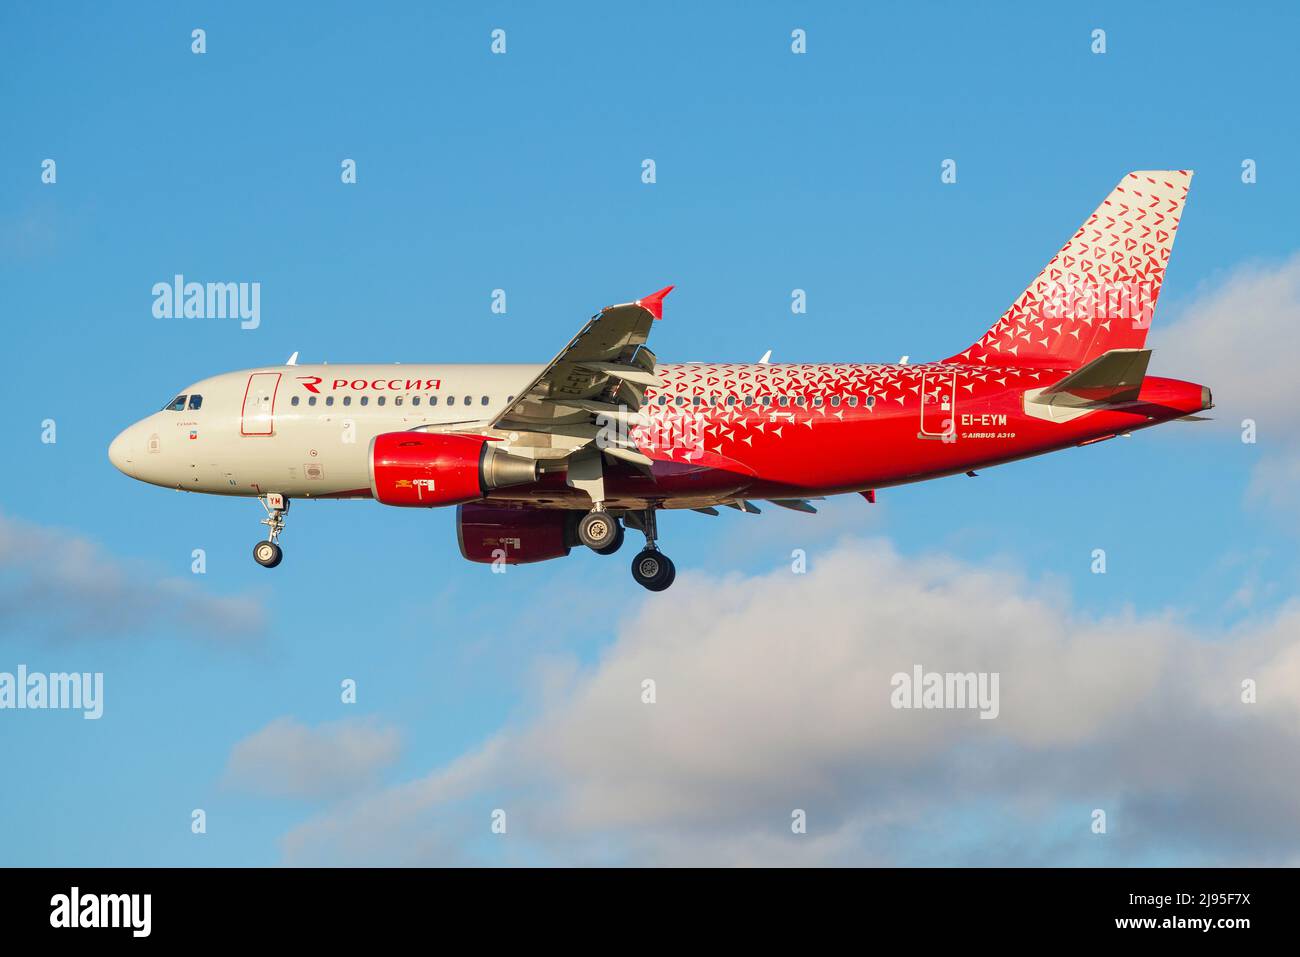 SAINT PETERSBURG, RUSSIA - OCTOBER 25, 2018: Aircraft Airbus A319-111 'Suzdal' (EI-EYM) of Rossiya airline before landing on Pulkovo airport. Side vie Stock Photo